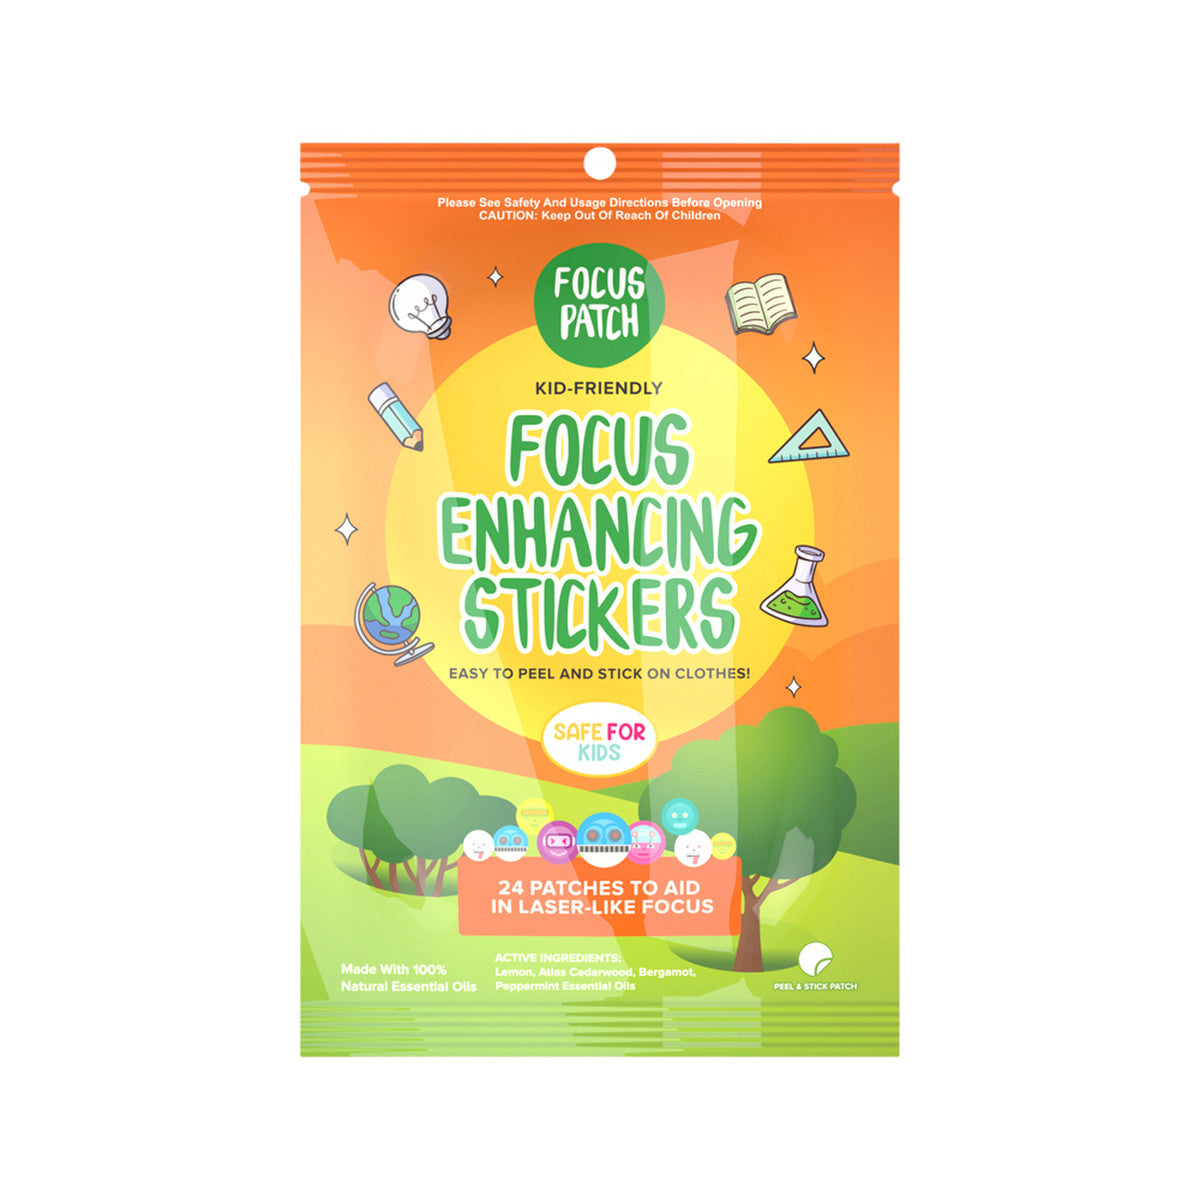 NATPAT (The Natural Patch Co.) - FocusPatch Organic Focus Enhancing Stickers